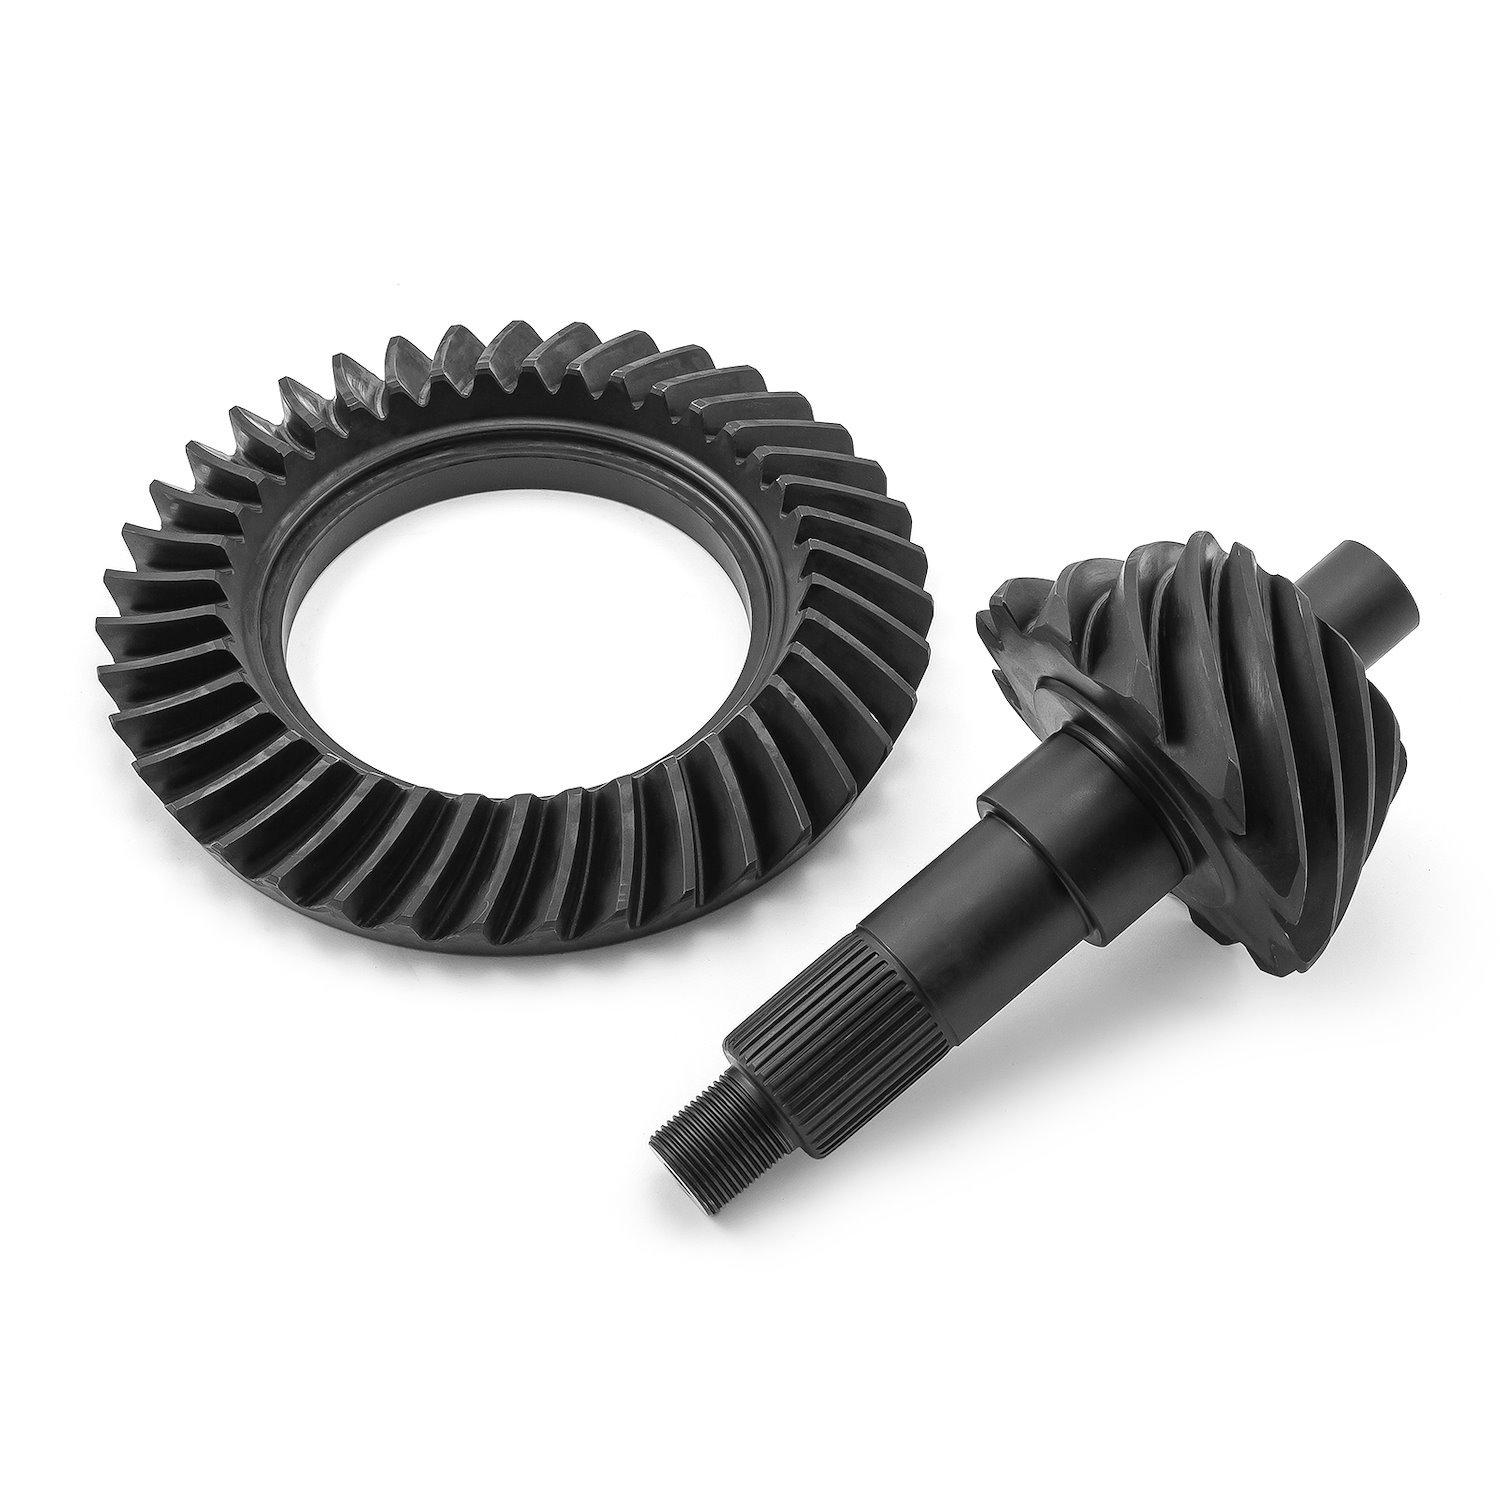 PCE211.1111 Ford 9" 28 Spline 5.50:1 Ratio Ring and Pinion Gears Set 8620